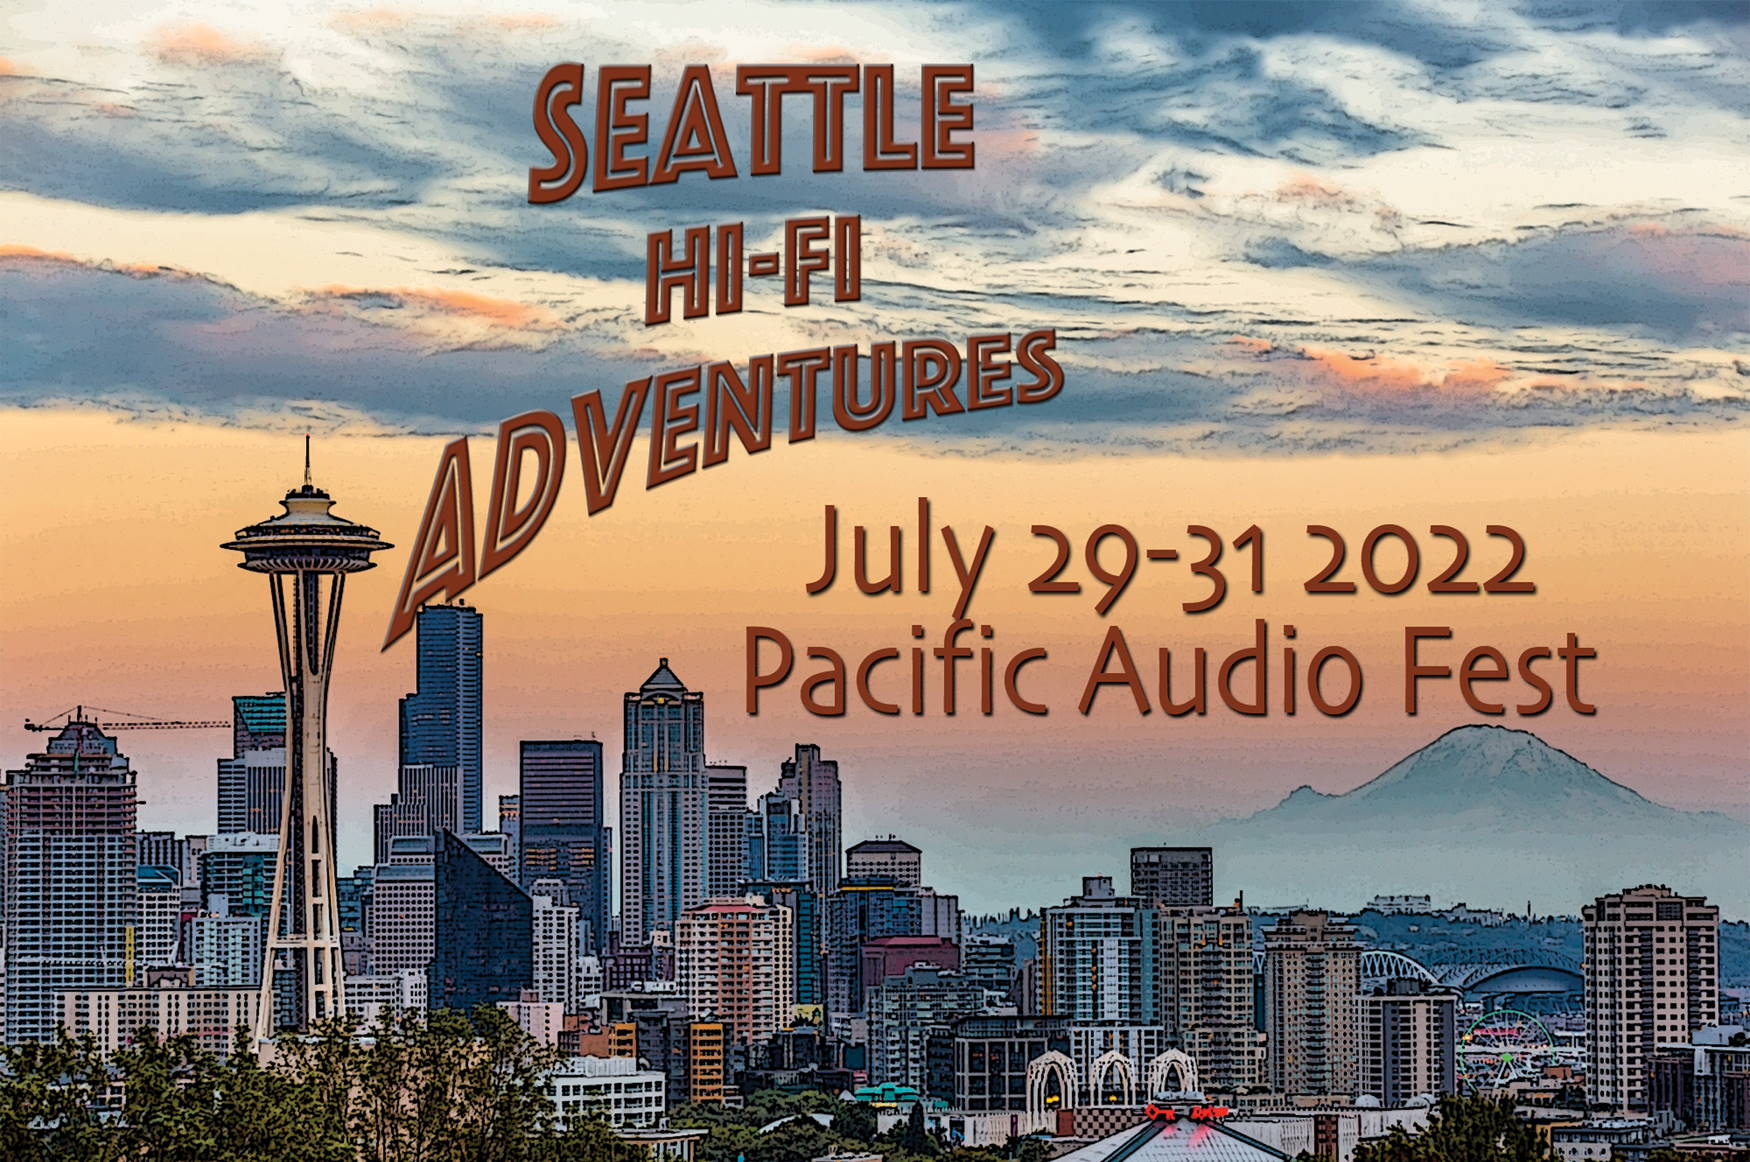 Pacific Audiofest - Seattle, July 29-31 2022